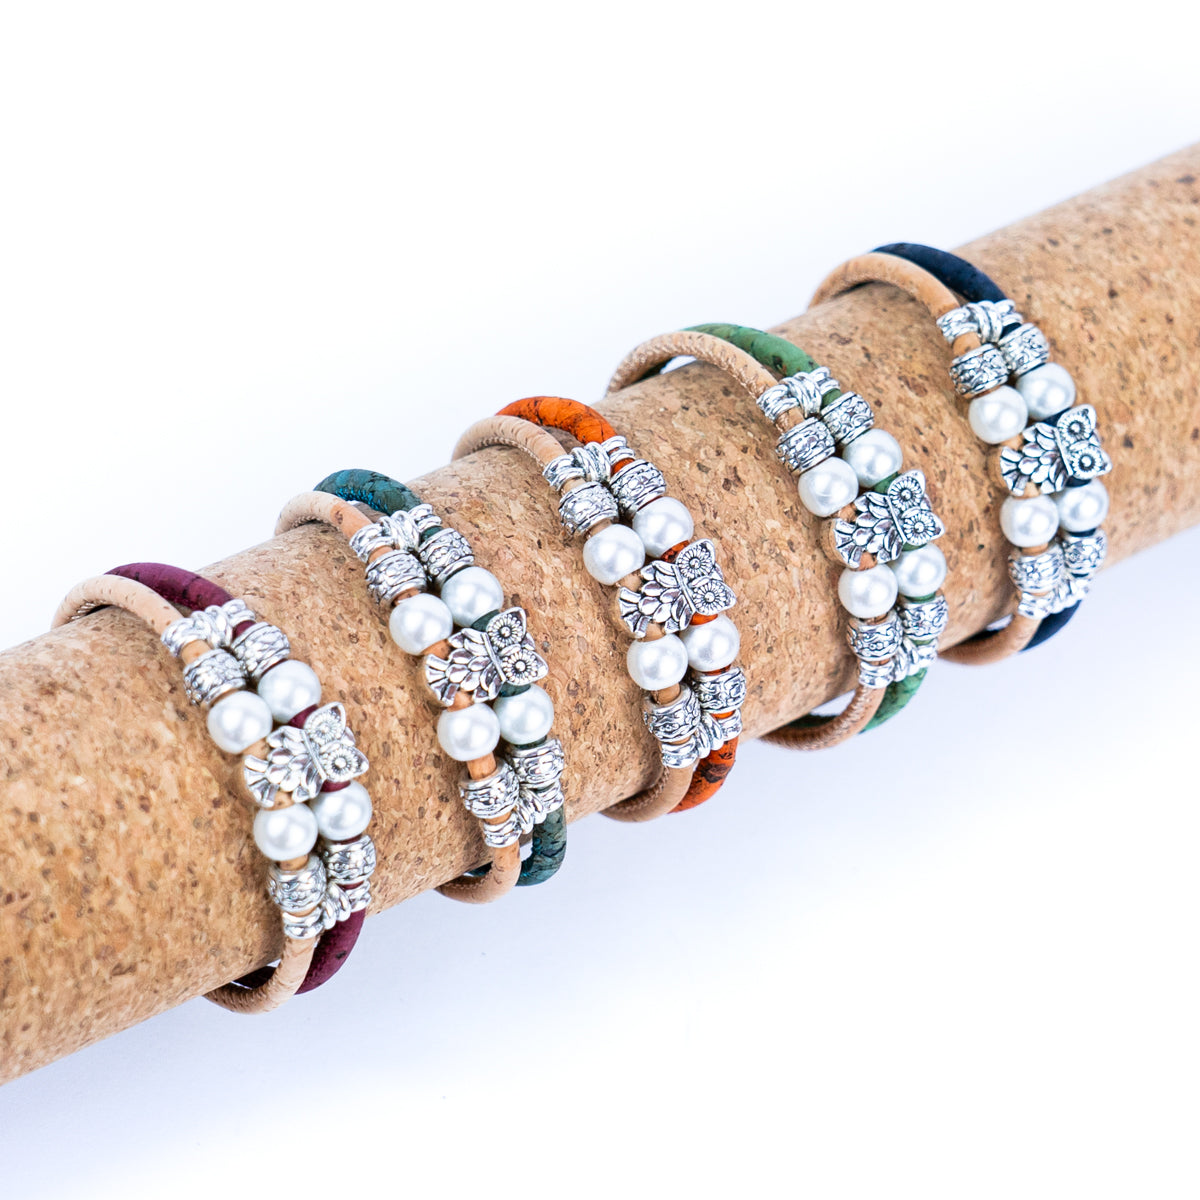 3MM Round Colorful Cork Cord w/ Owl Alloy Accessories Handmade Women's Bracelet BR-413-MIX-5